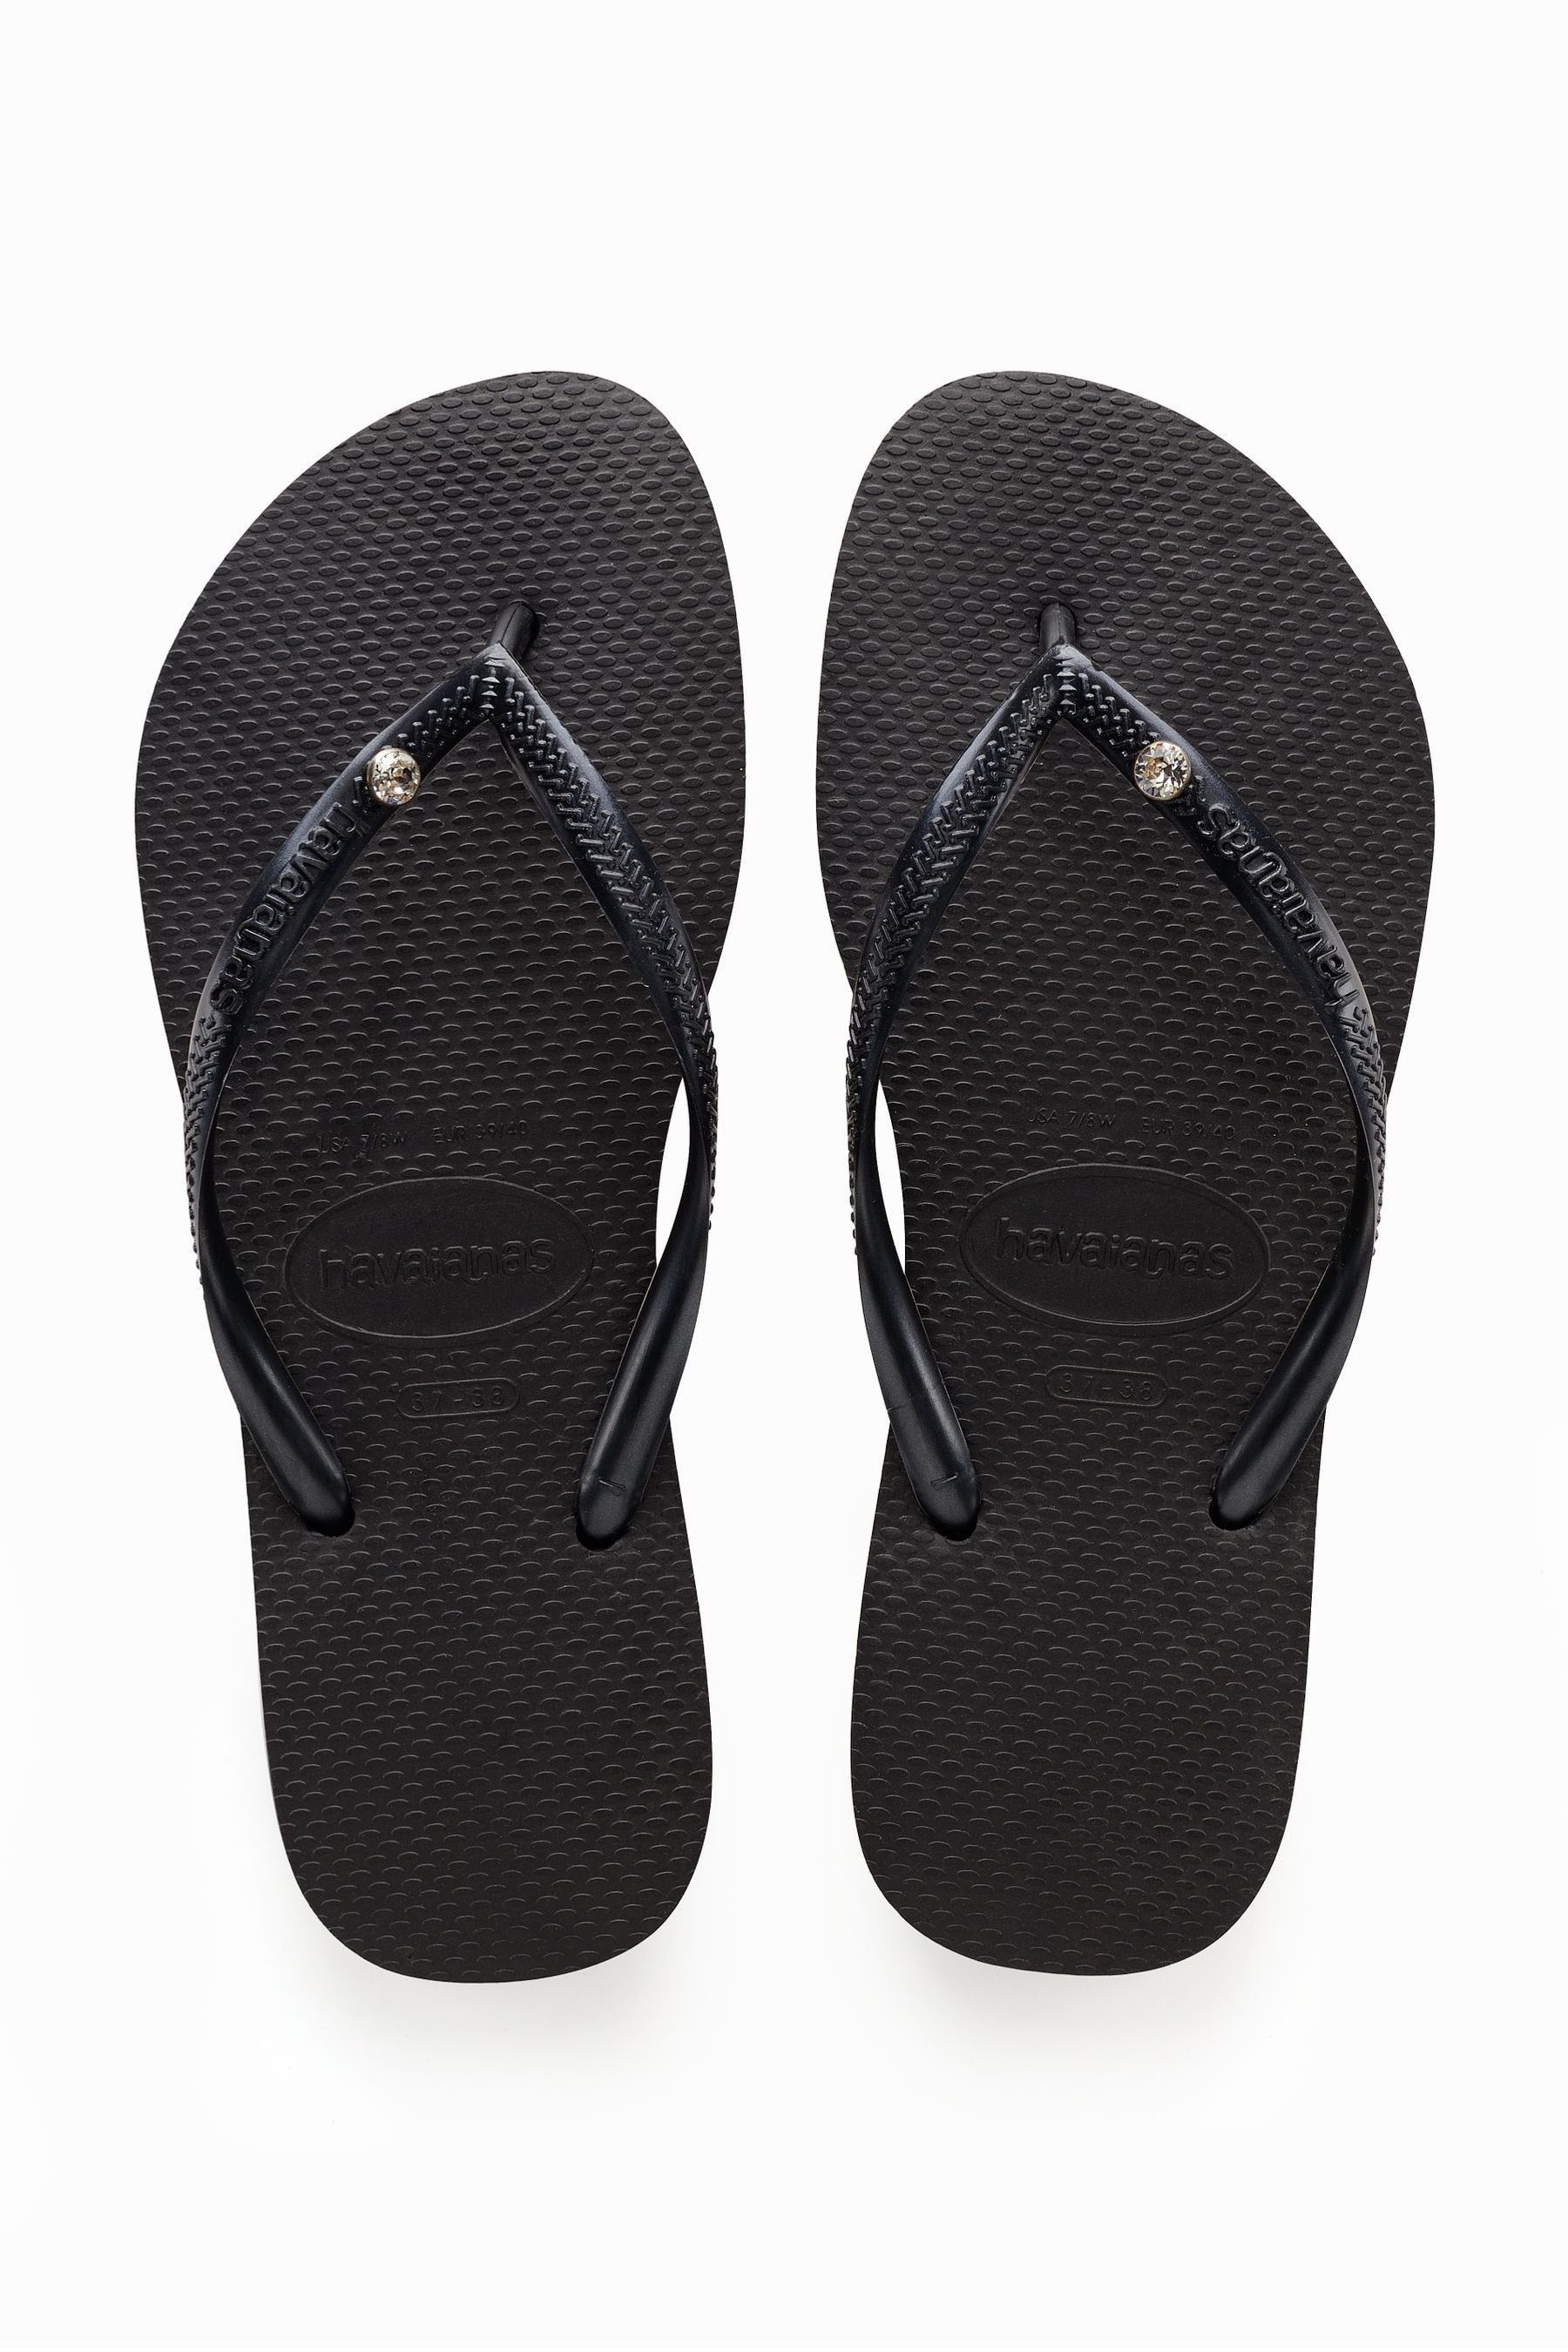 Buy Havaianas Slim Crystal Sandals from the Next UK online shop